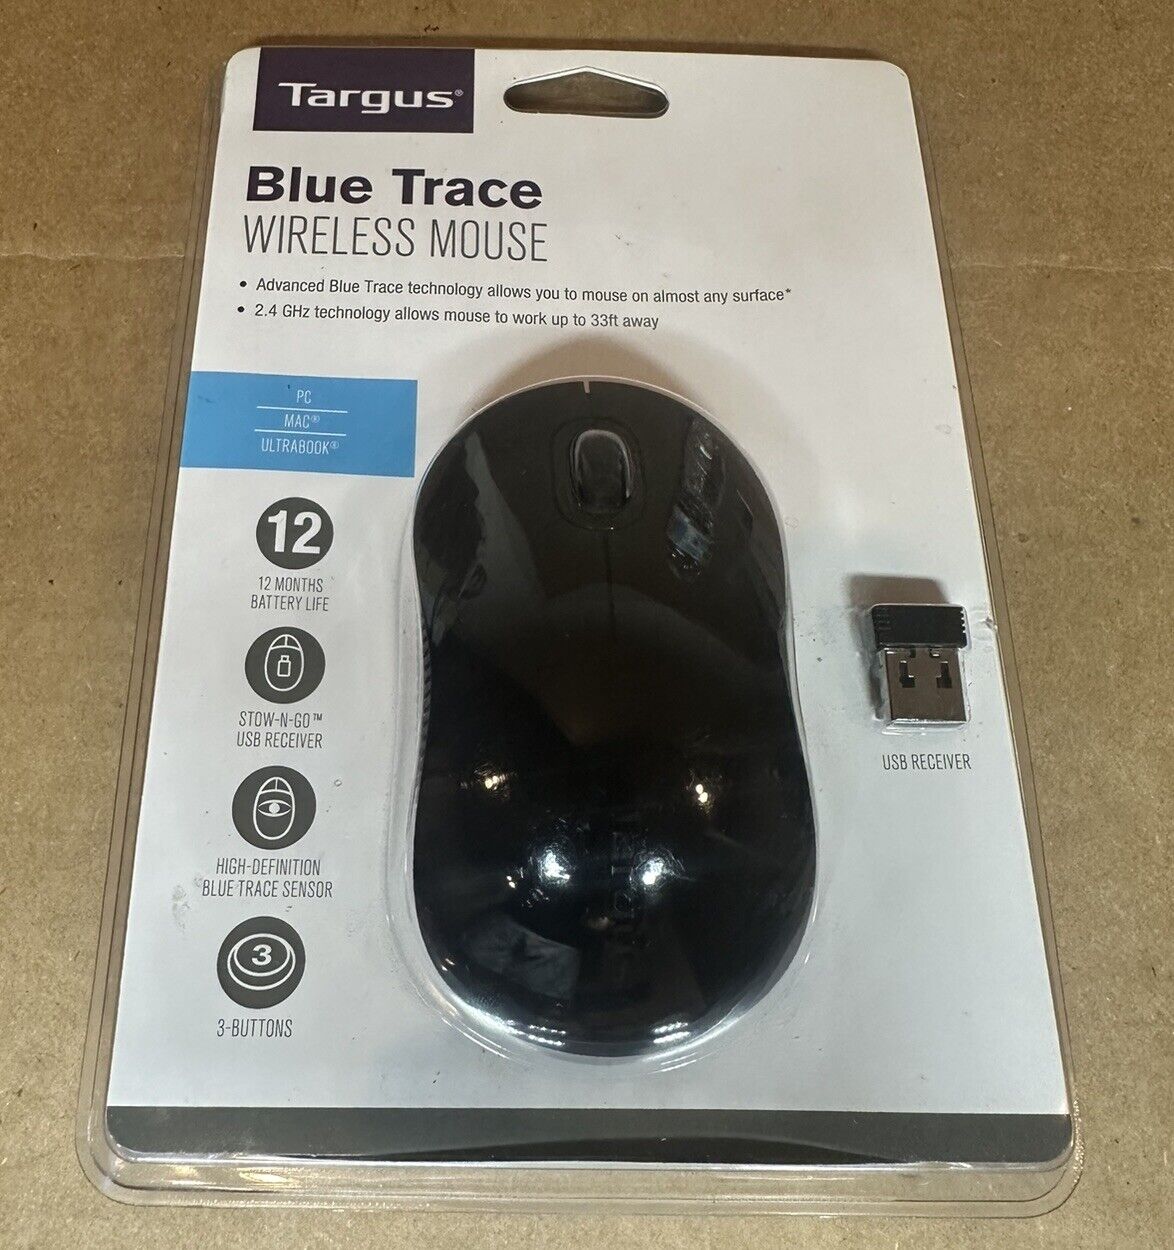 New Targus Blue Trace 2.4 GHz Wireless Mouse Black AMW50US